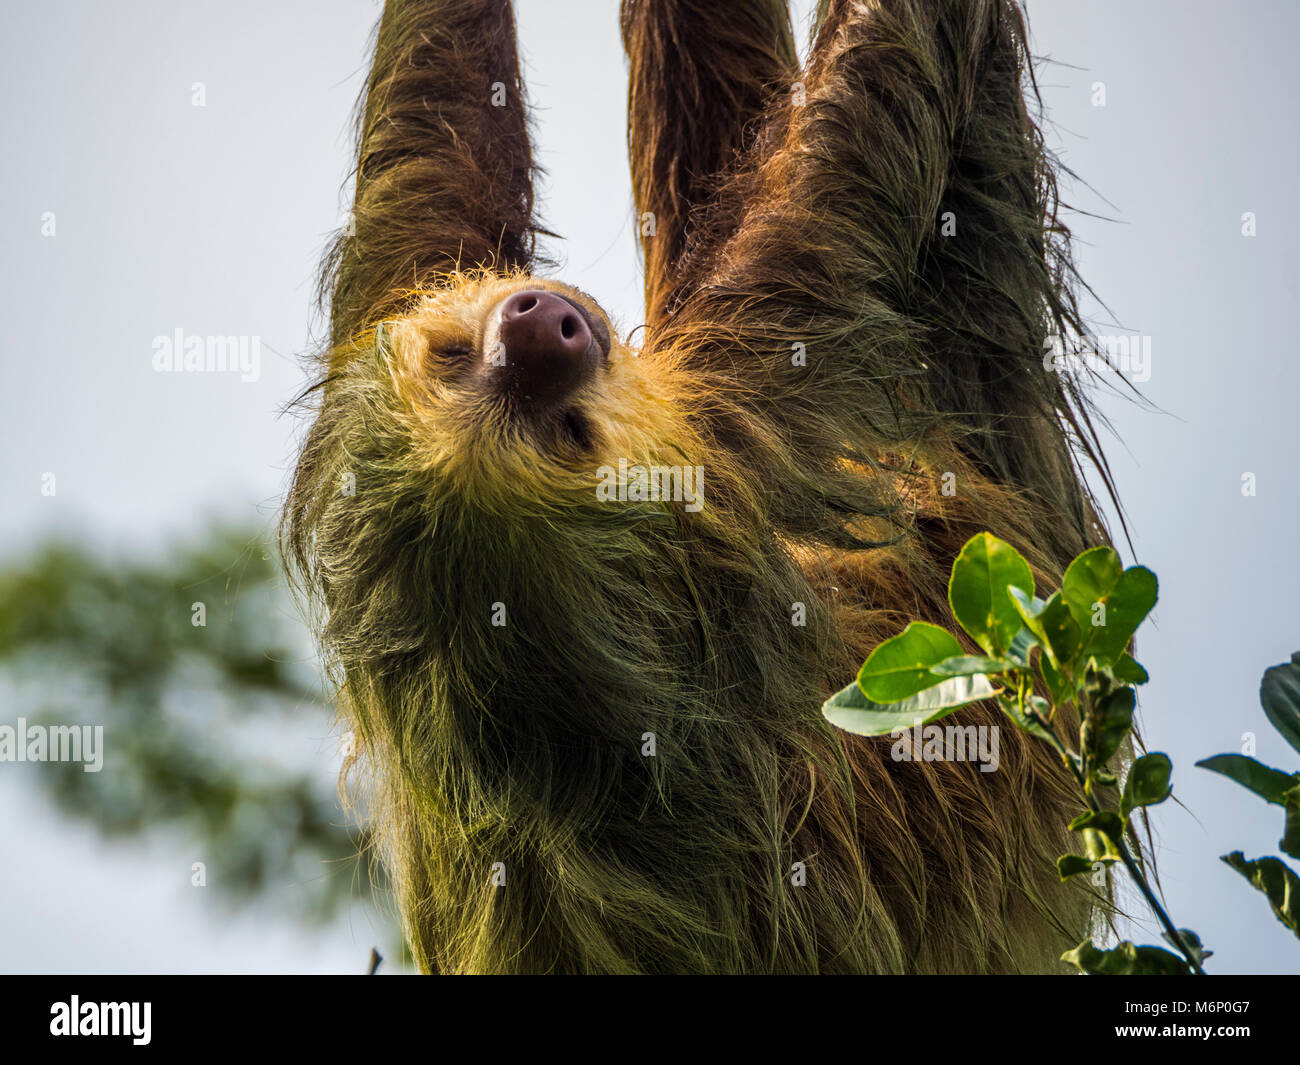 Sloth hanging from a power line near Sarapiqui, Costa Rica Stock Photo